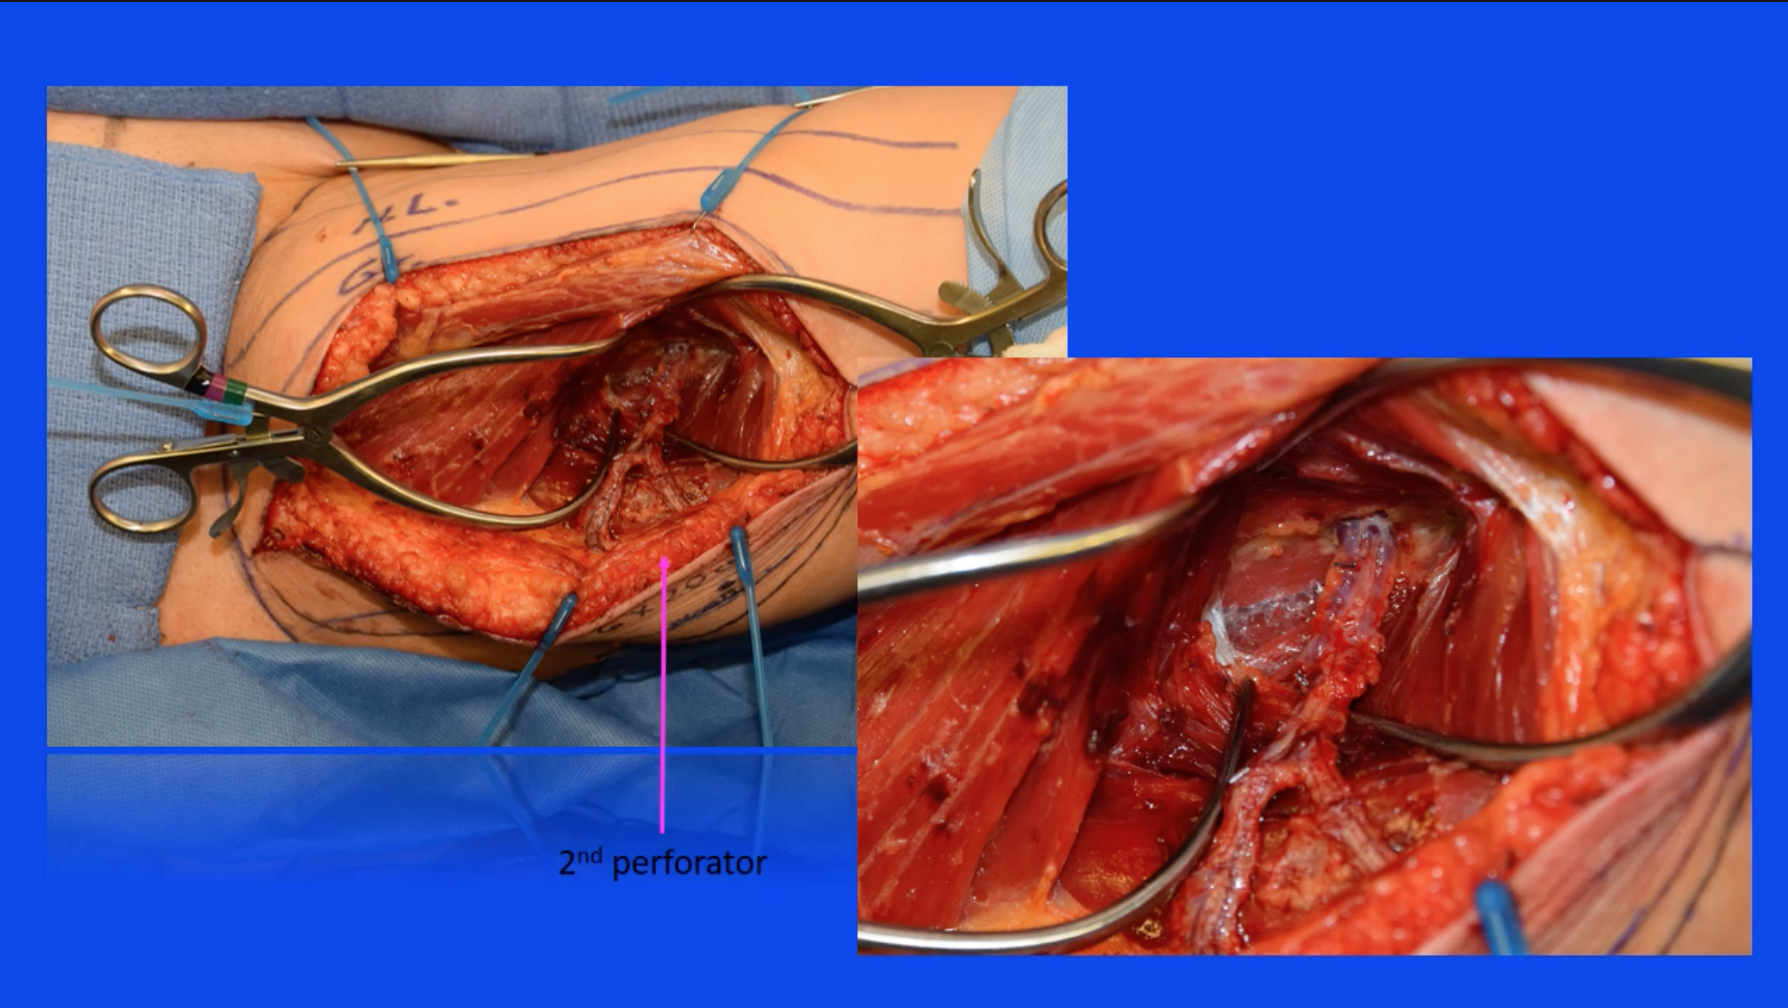 DIEP Flap Connected To Internal Thoracic Artery via Microsurgical